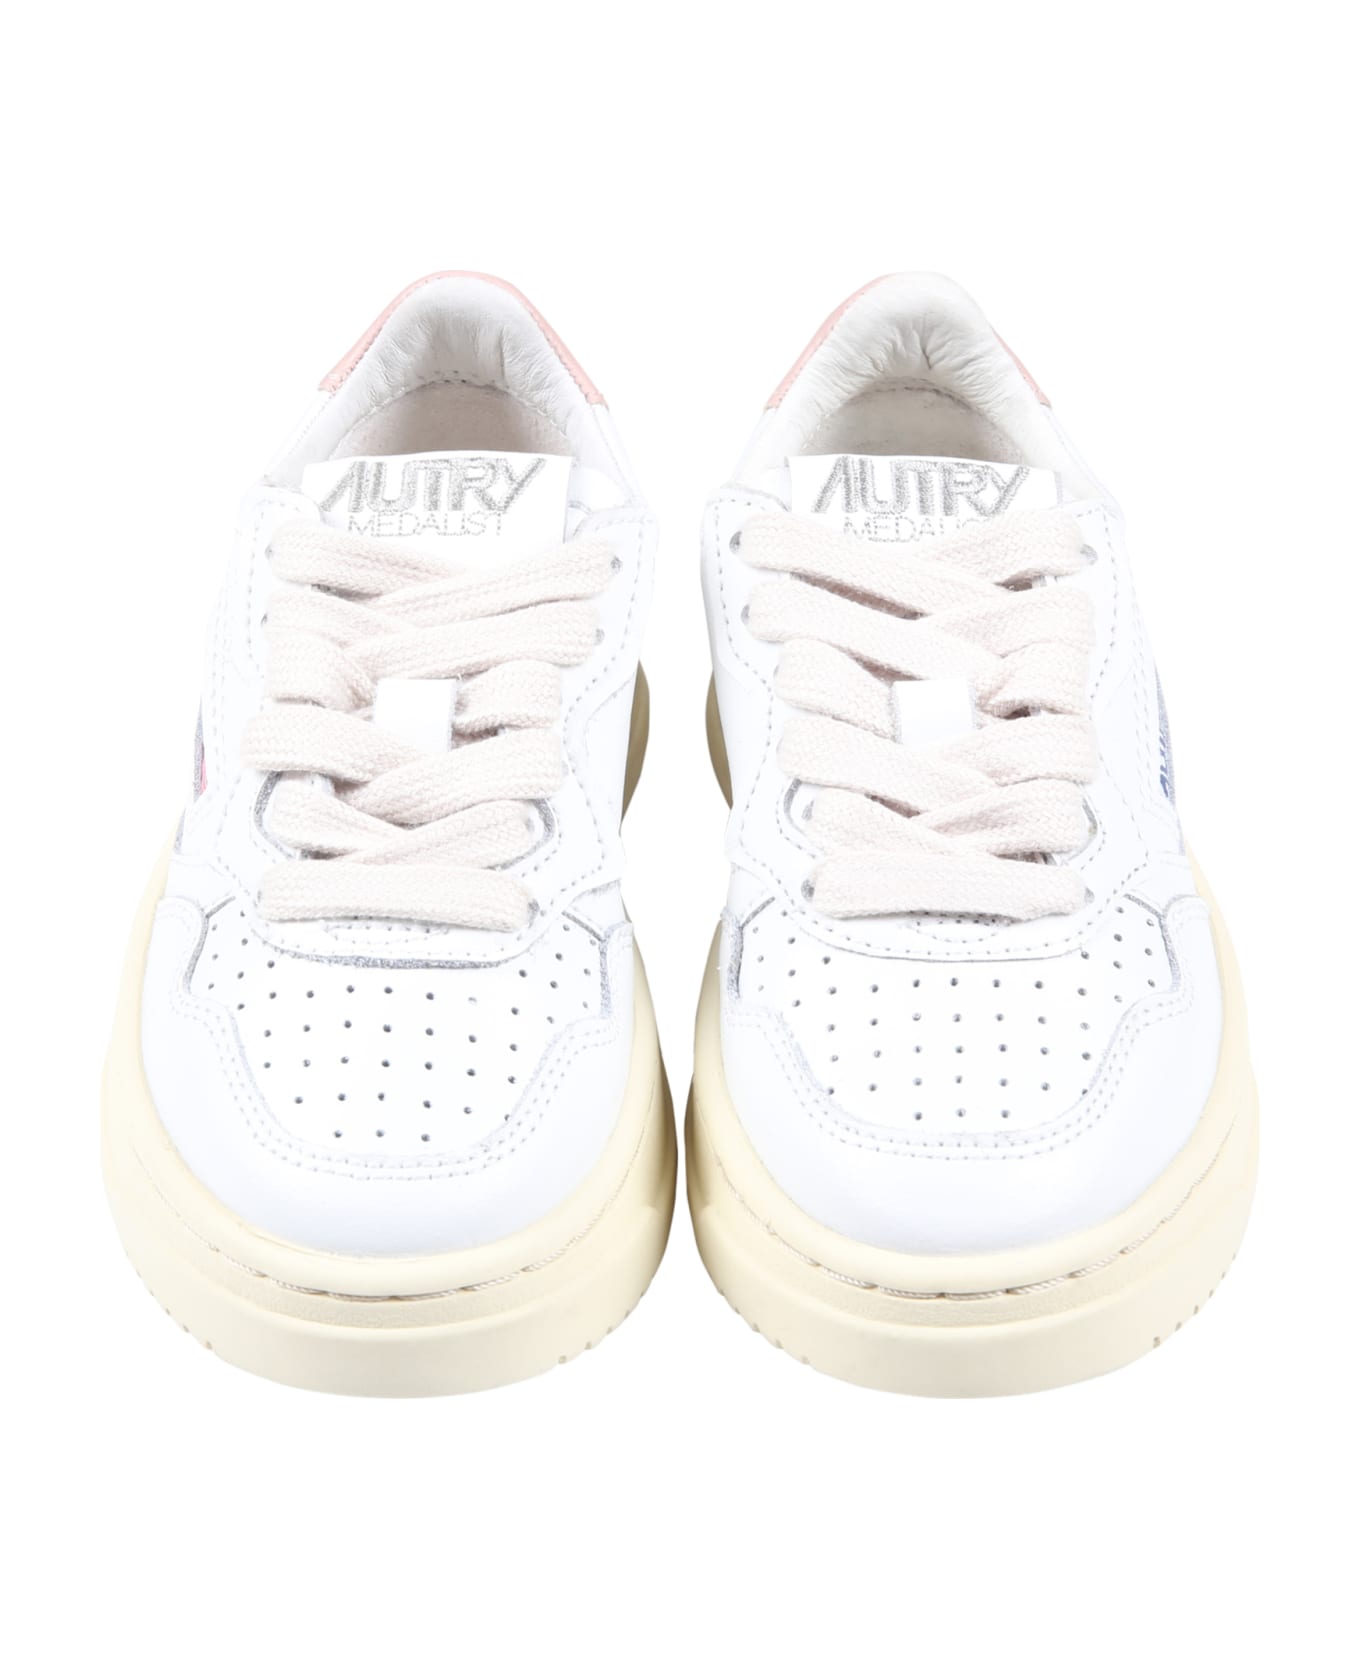 Autry White Sneakers For Kids With Pink Deatils - White シューズ